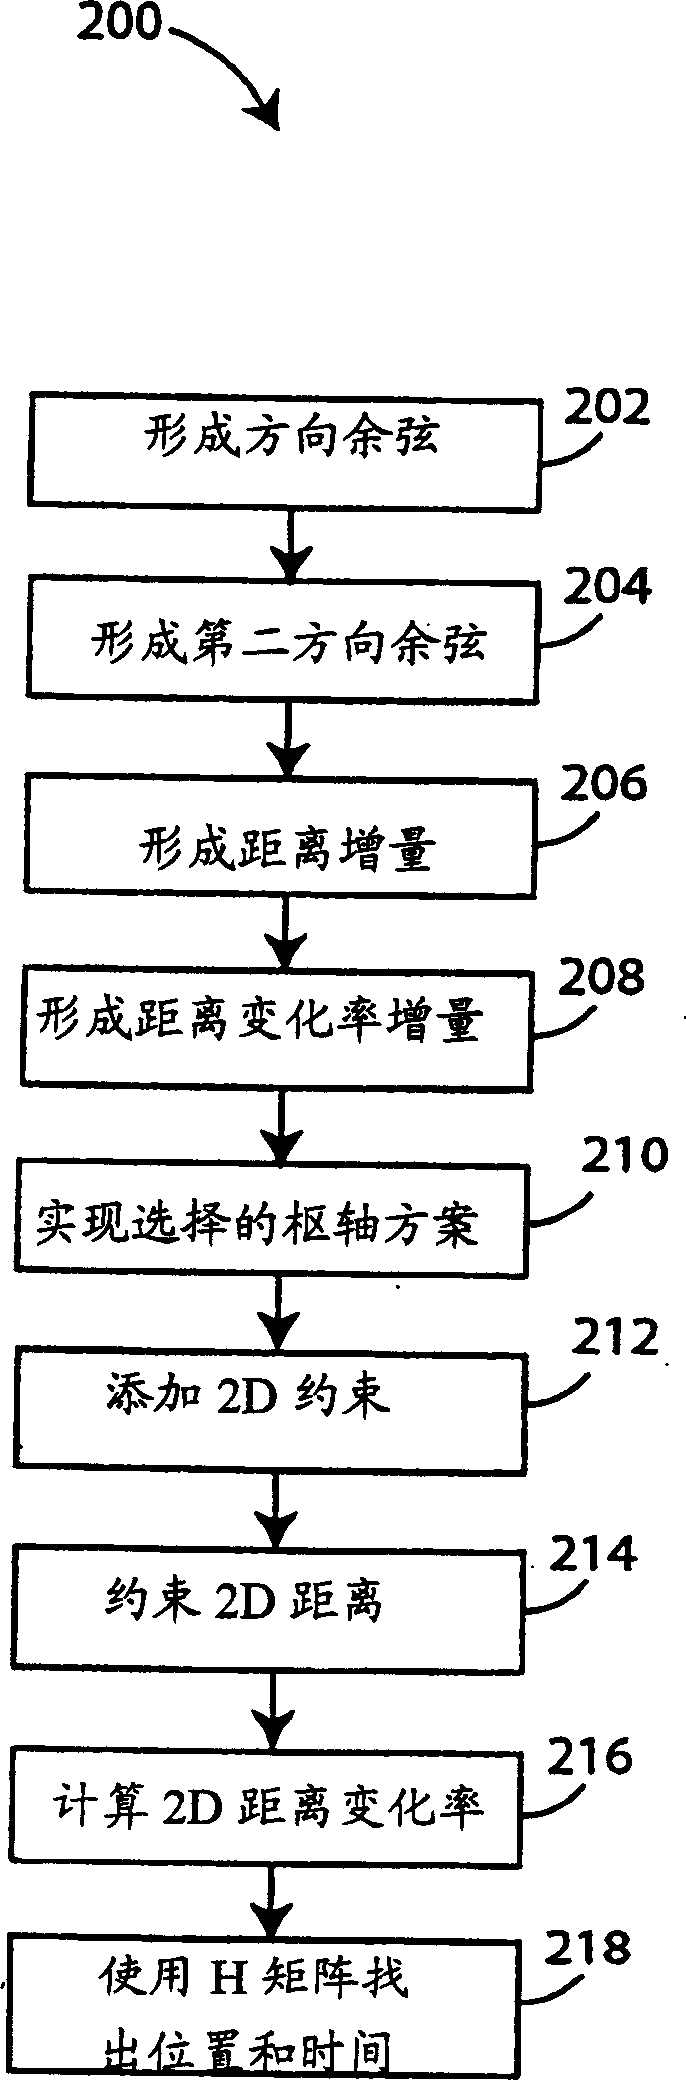 Method and system for determining position according to computing time